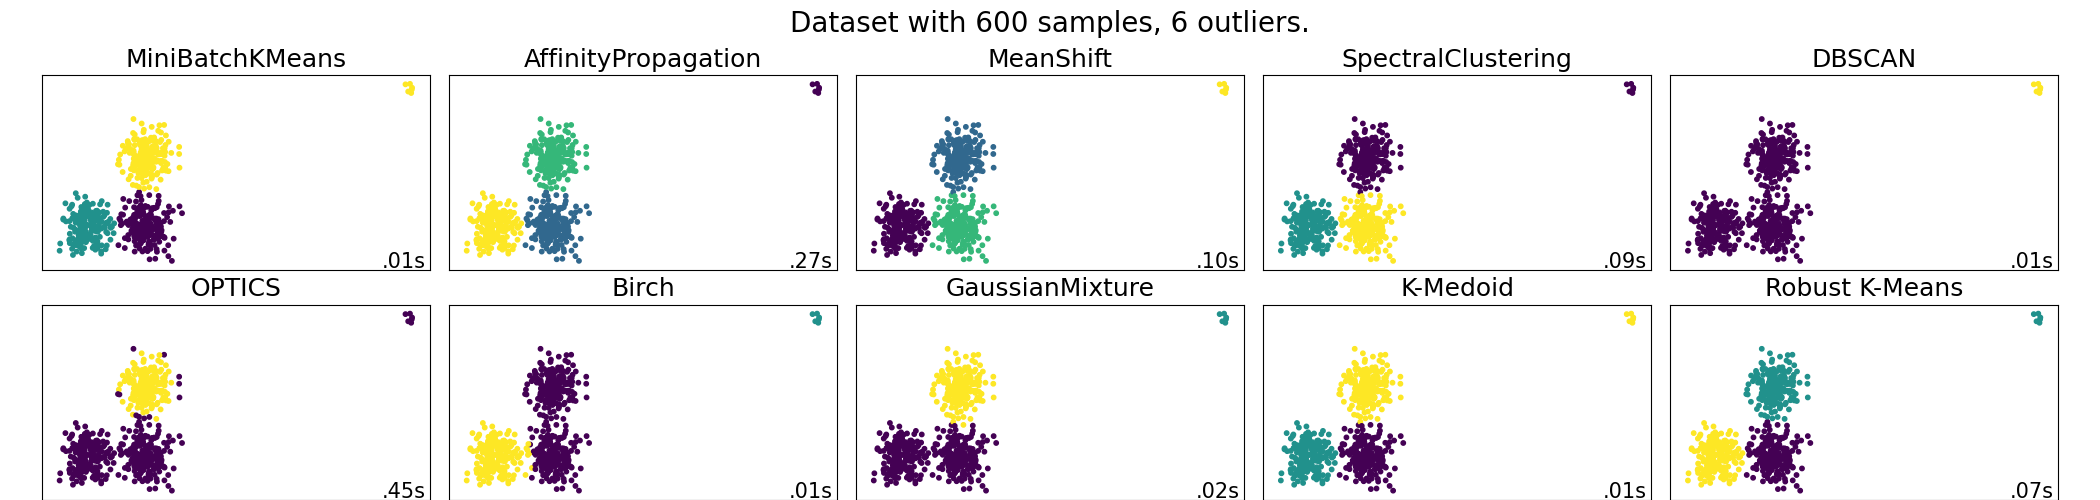 Dataset with 600 samples, 6 outliers., MiniBatchKMeans, AffinityPropagation, MeanShift, SpectralClustering, DBSCAN, OPTICS, Birch, GaussianMixture, K-Medoid, Robust K-Means